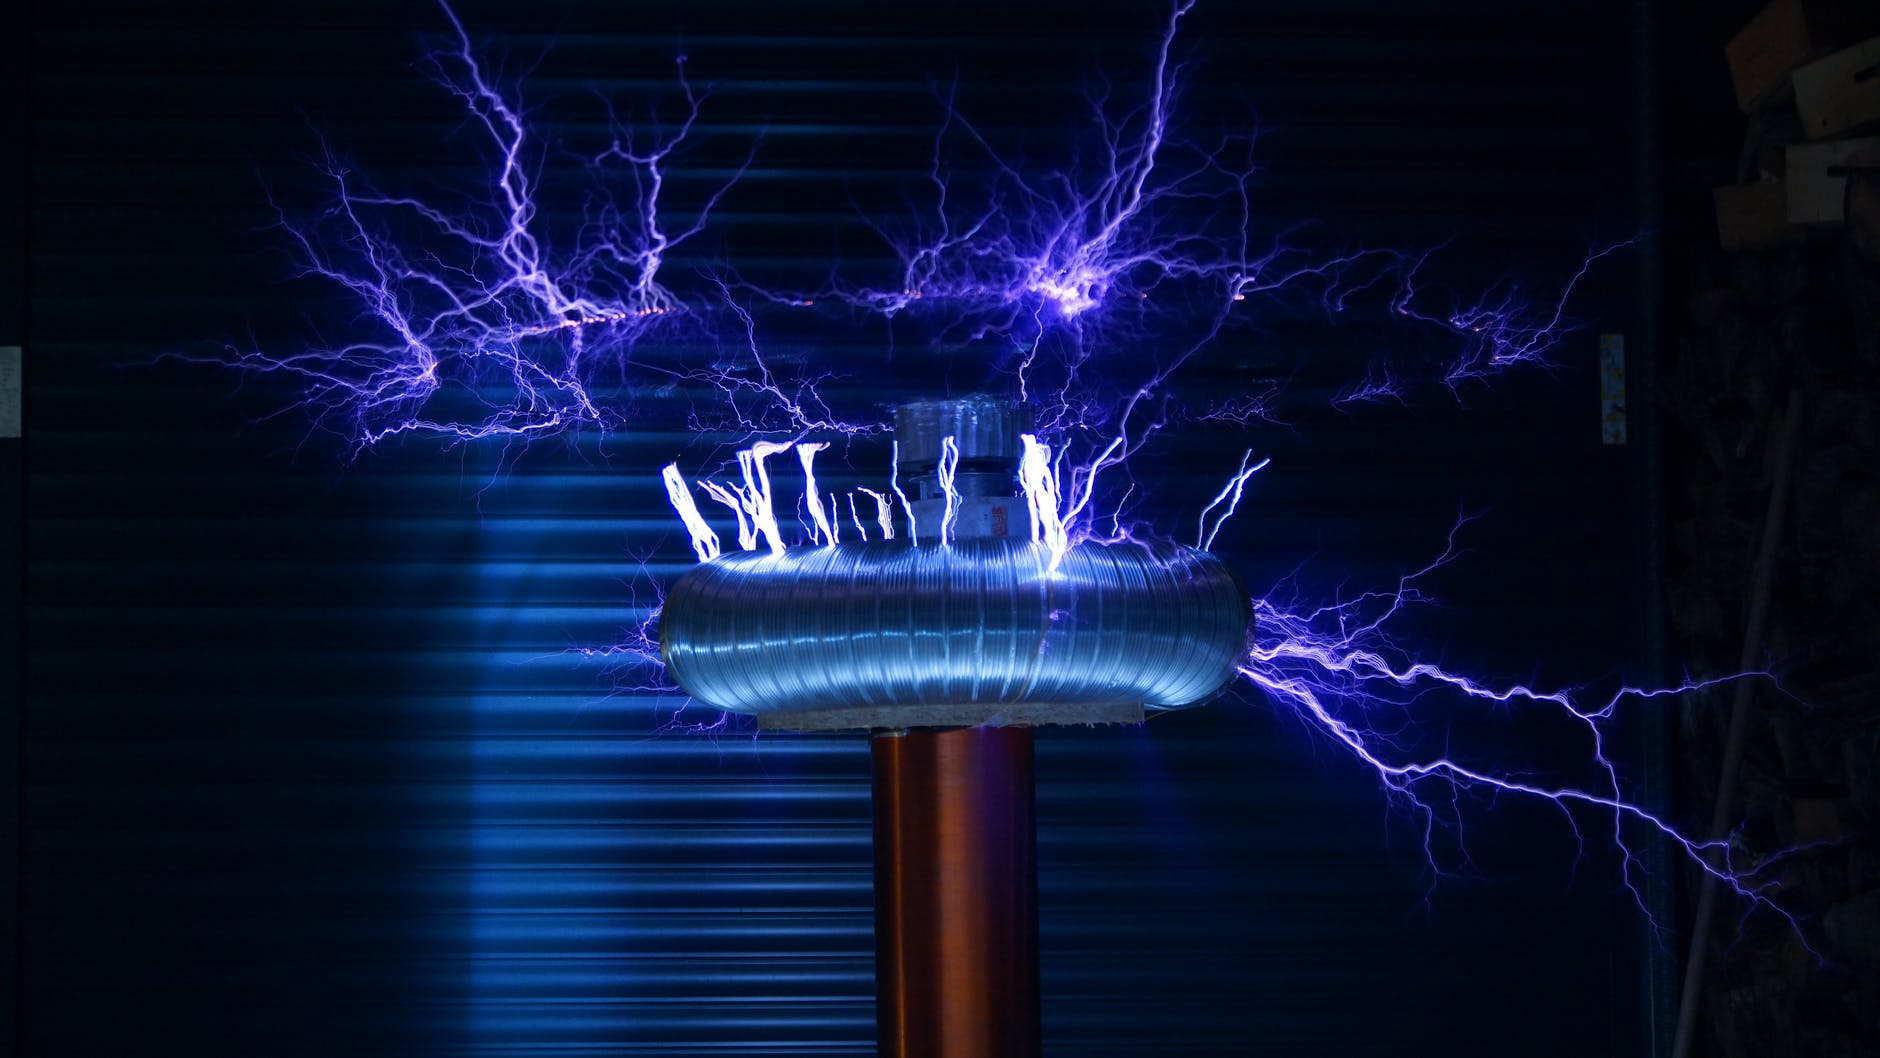 A photo of a Tesla coil, a tool that converts electrical power into visible fingers of light, similar to lightning